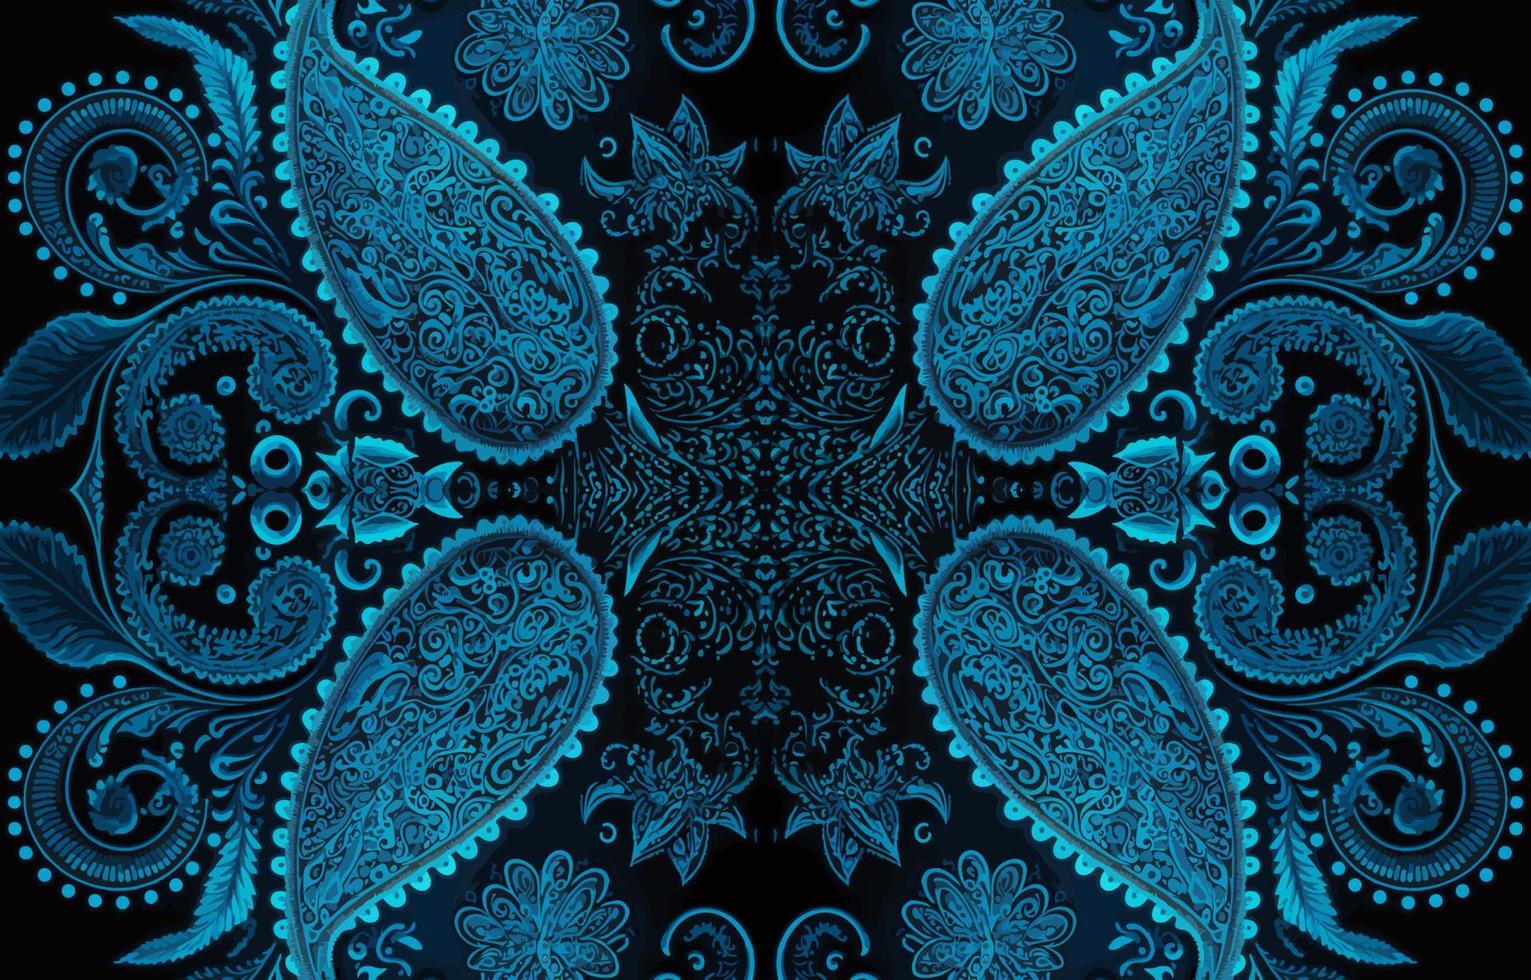 Paisley seamless pattern blue tone. Abstract traditional folk antique ethnic tribal graphic paisley line. Texture textile fabric patterns vector illustration. Ornate elegant luxury vintage retro style